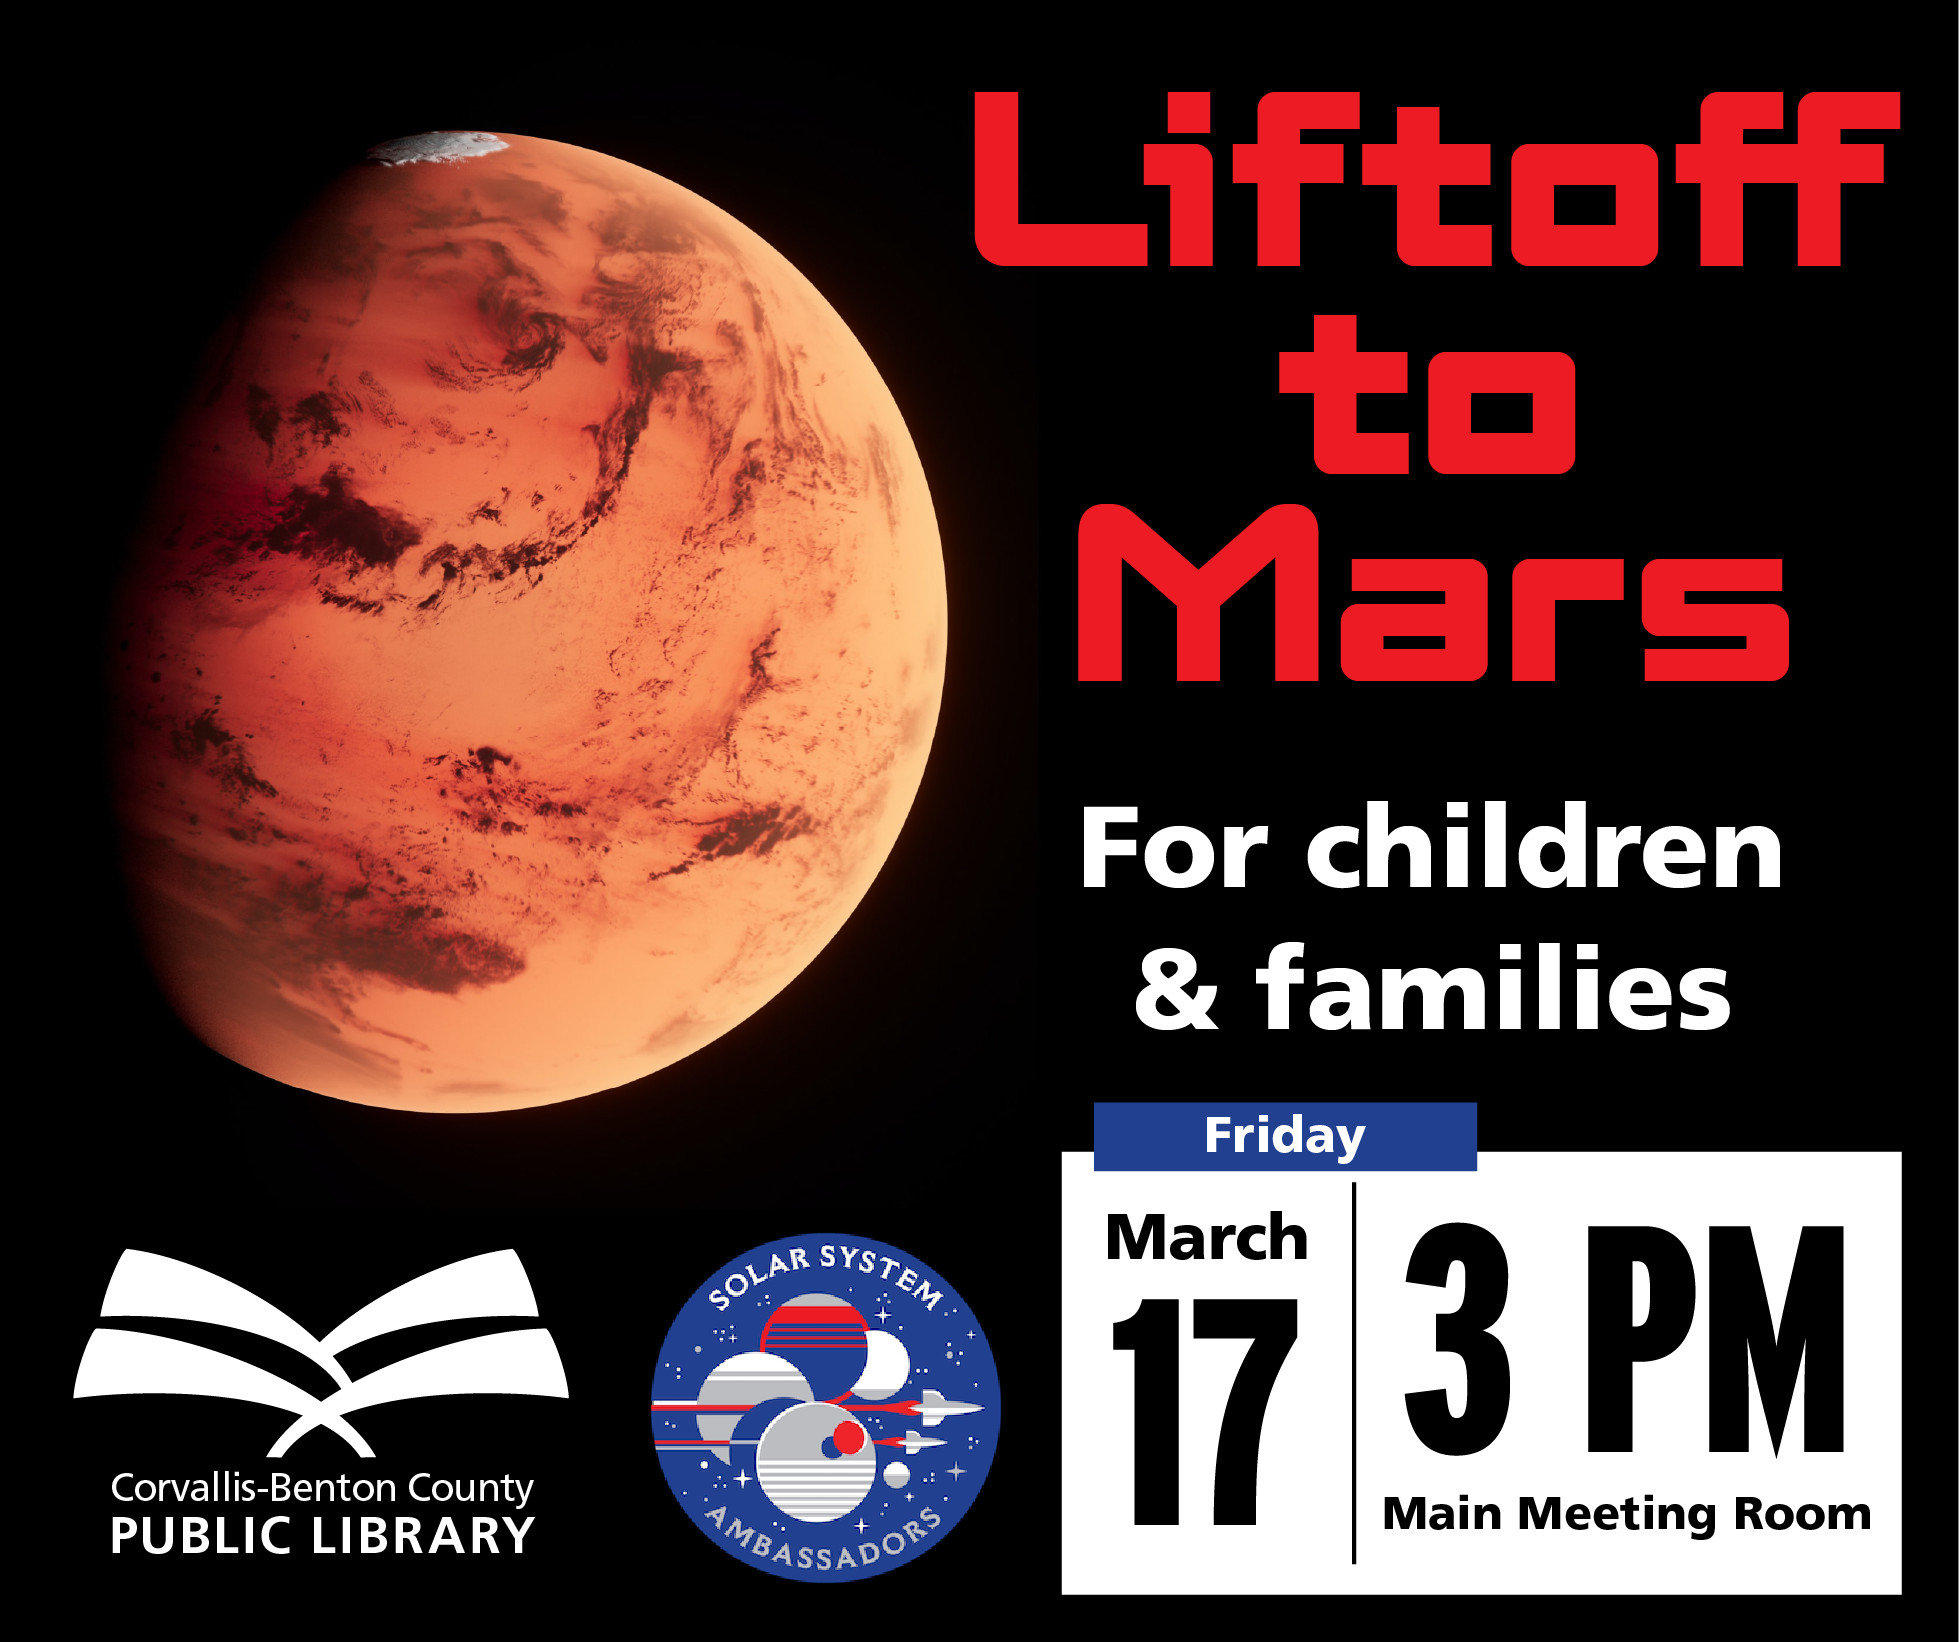 Liftoff to Mars, for children & families, March 17 at 3 PM